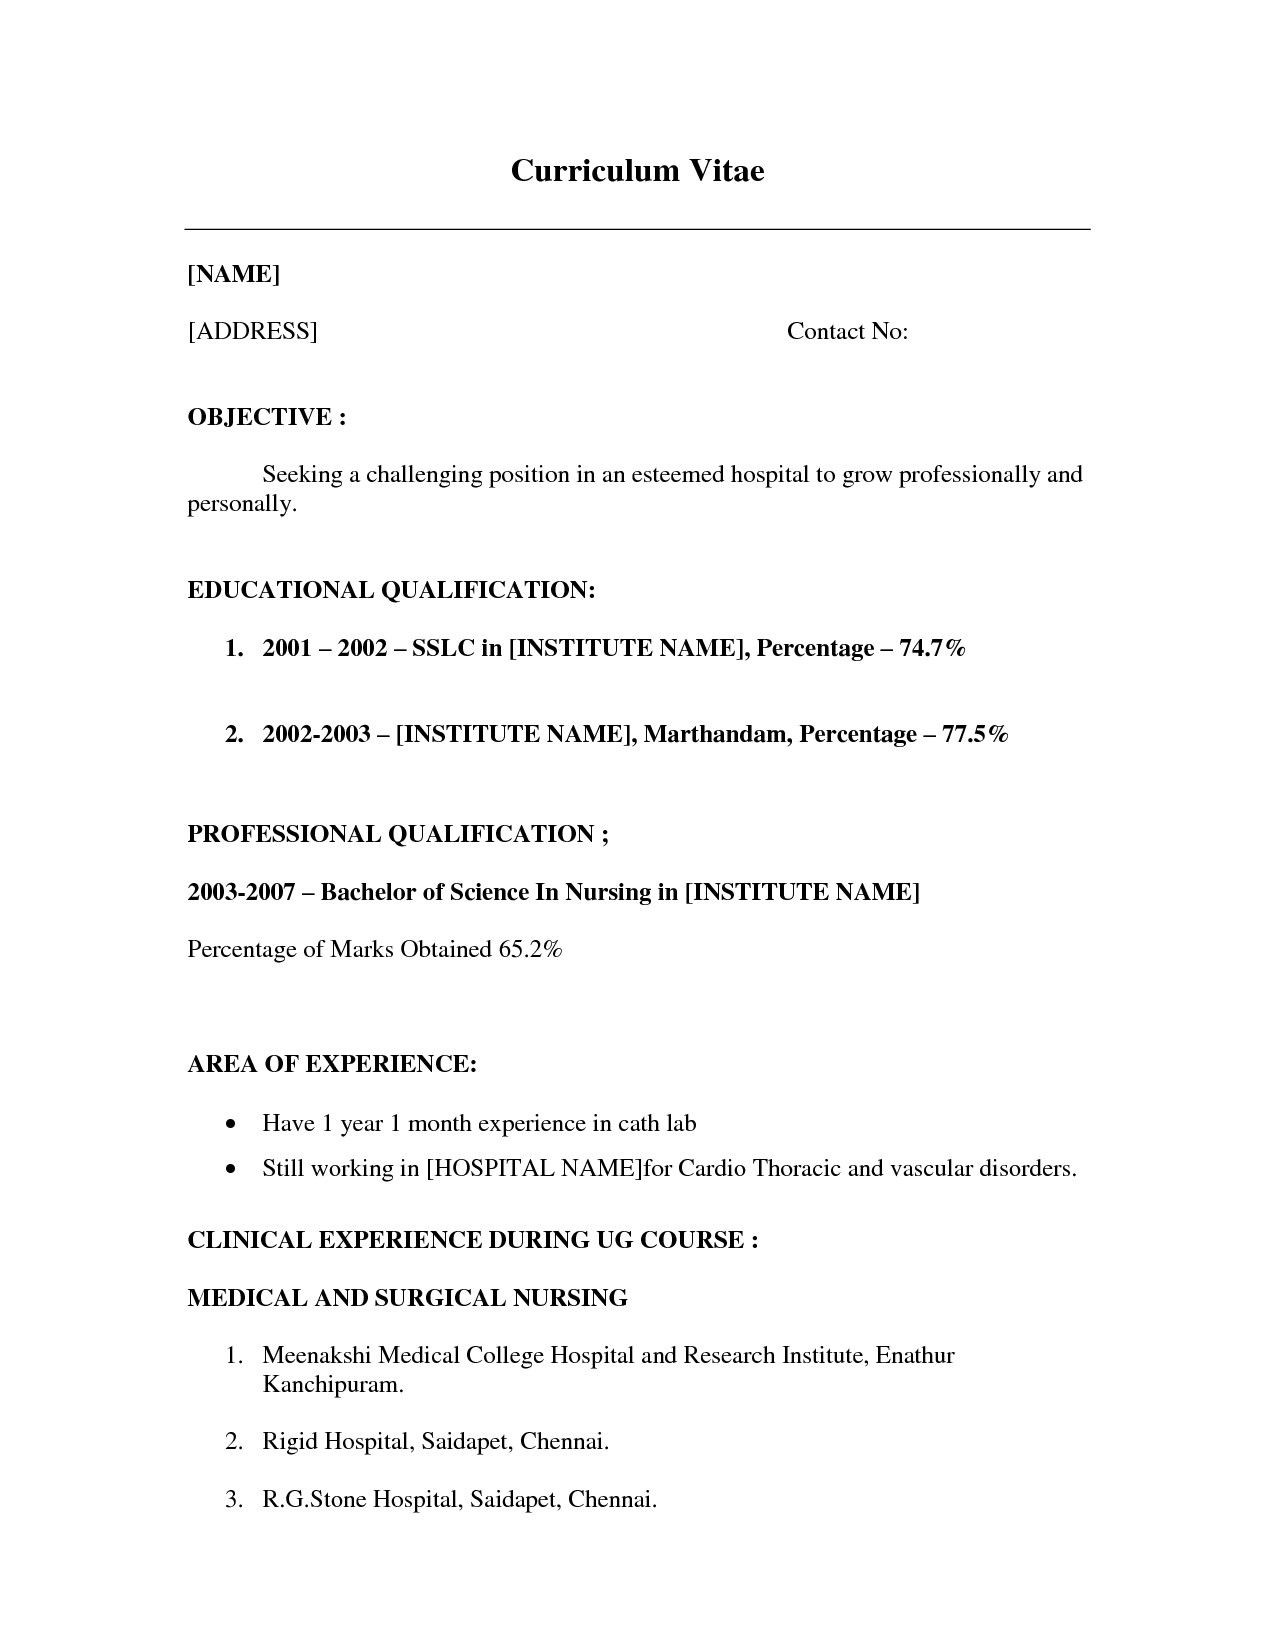 Resume Template for Little Work Experience Resume Examples Little Work Experience – Resume Templates Job …